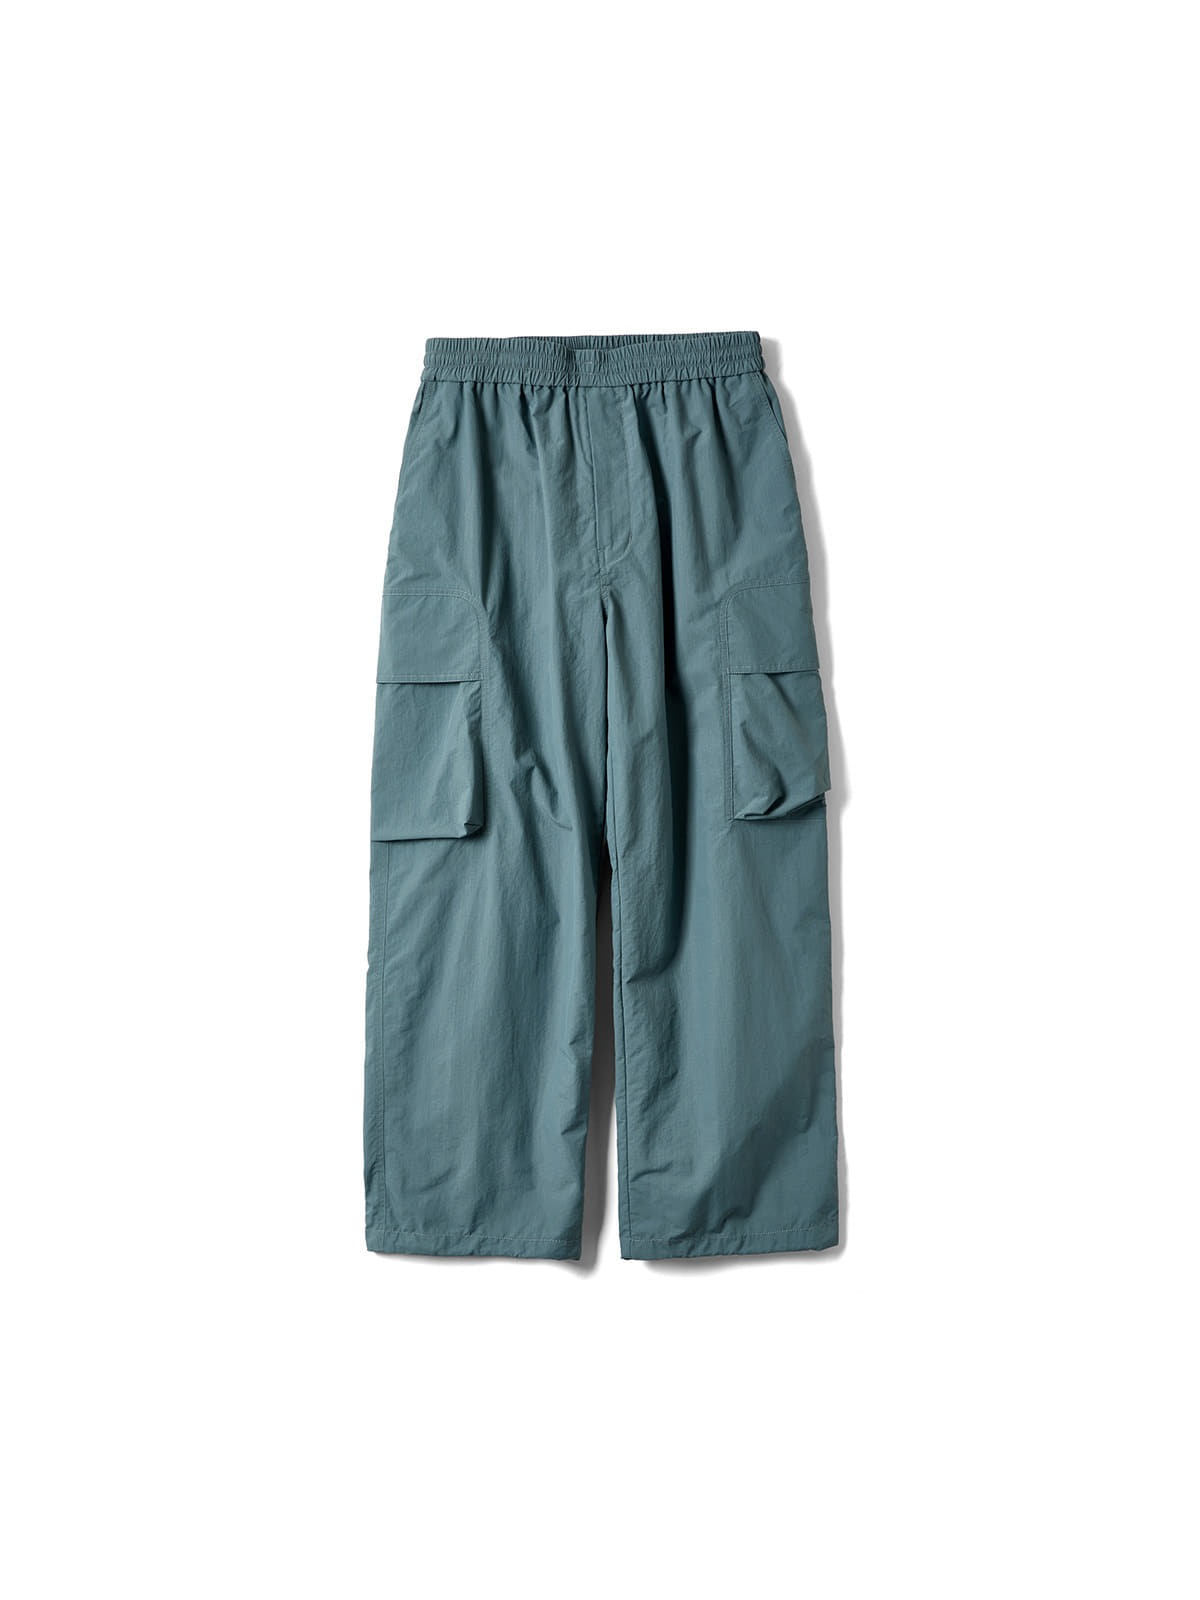 Undercover Coach Pants (Sage Green)